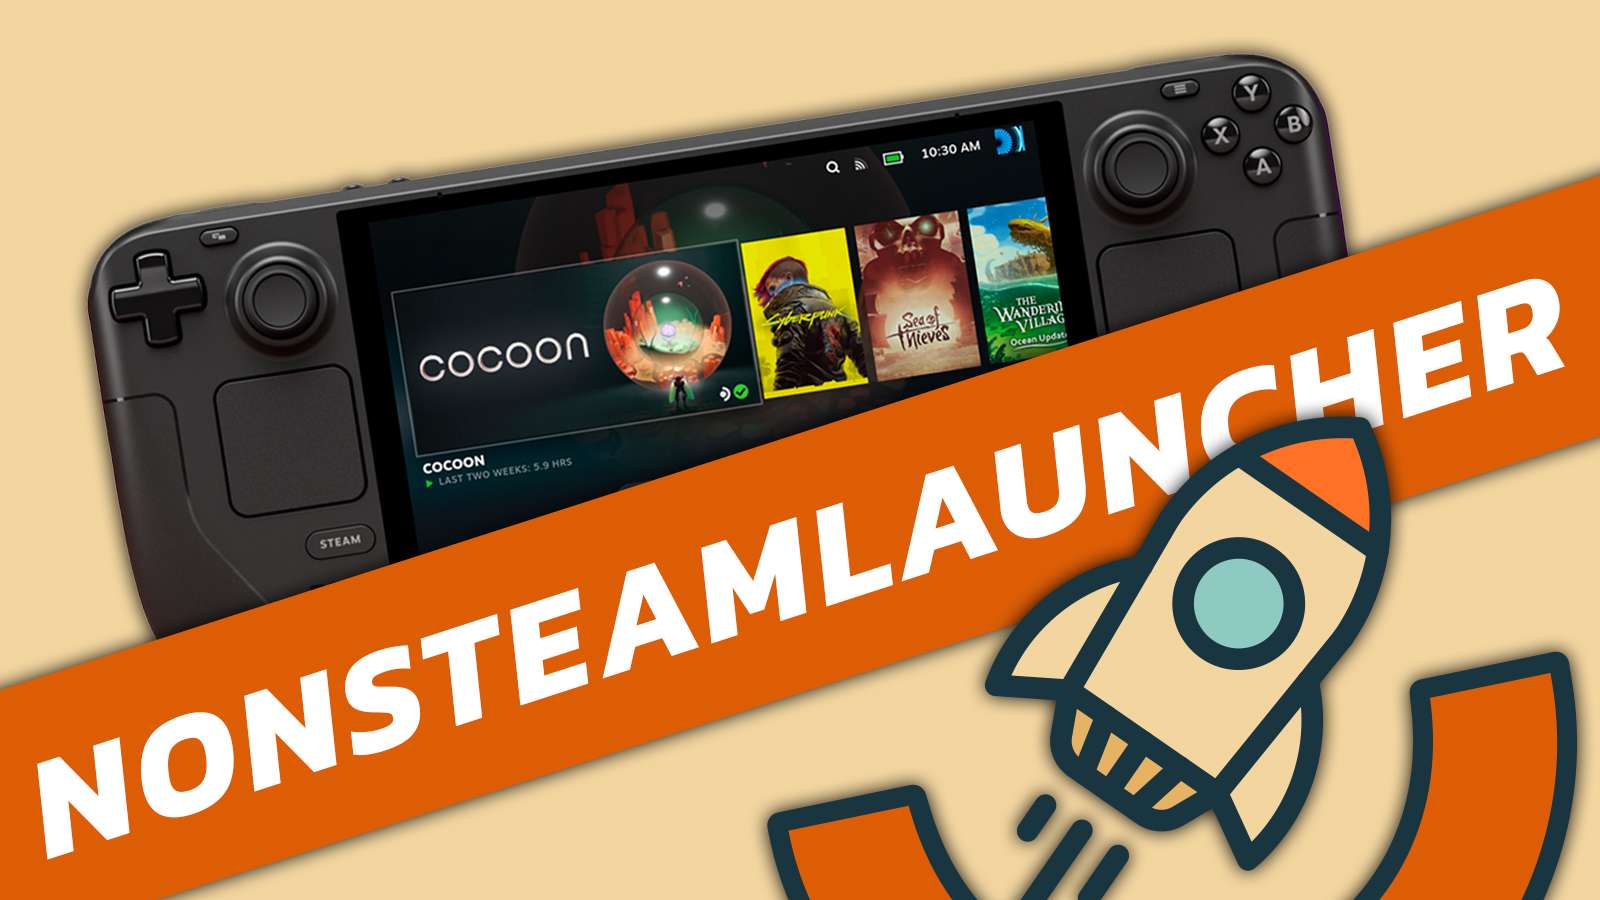 NonSteamLauncher text on an orange bar across the screen. a Steam Deck OLED and the NonSteamLauncher logo are positioned on either side